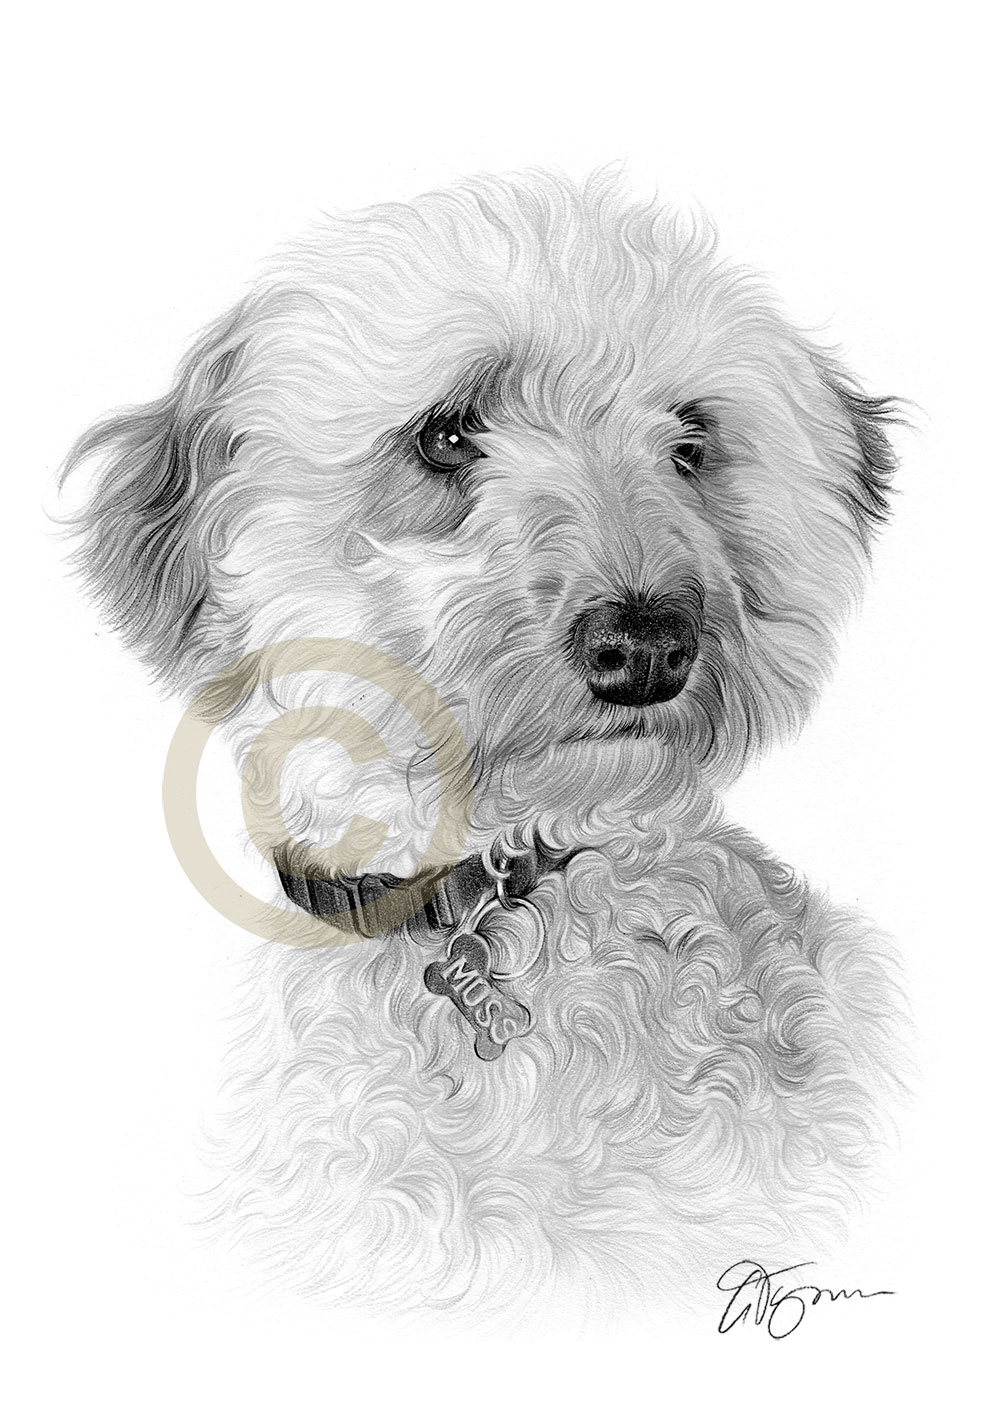 Pet portrait commission of a cavoodle called Moss by artist Gary Tymon